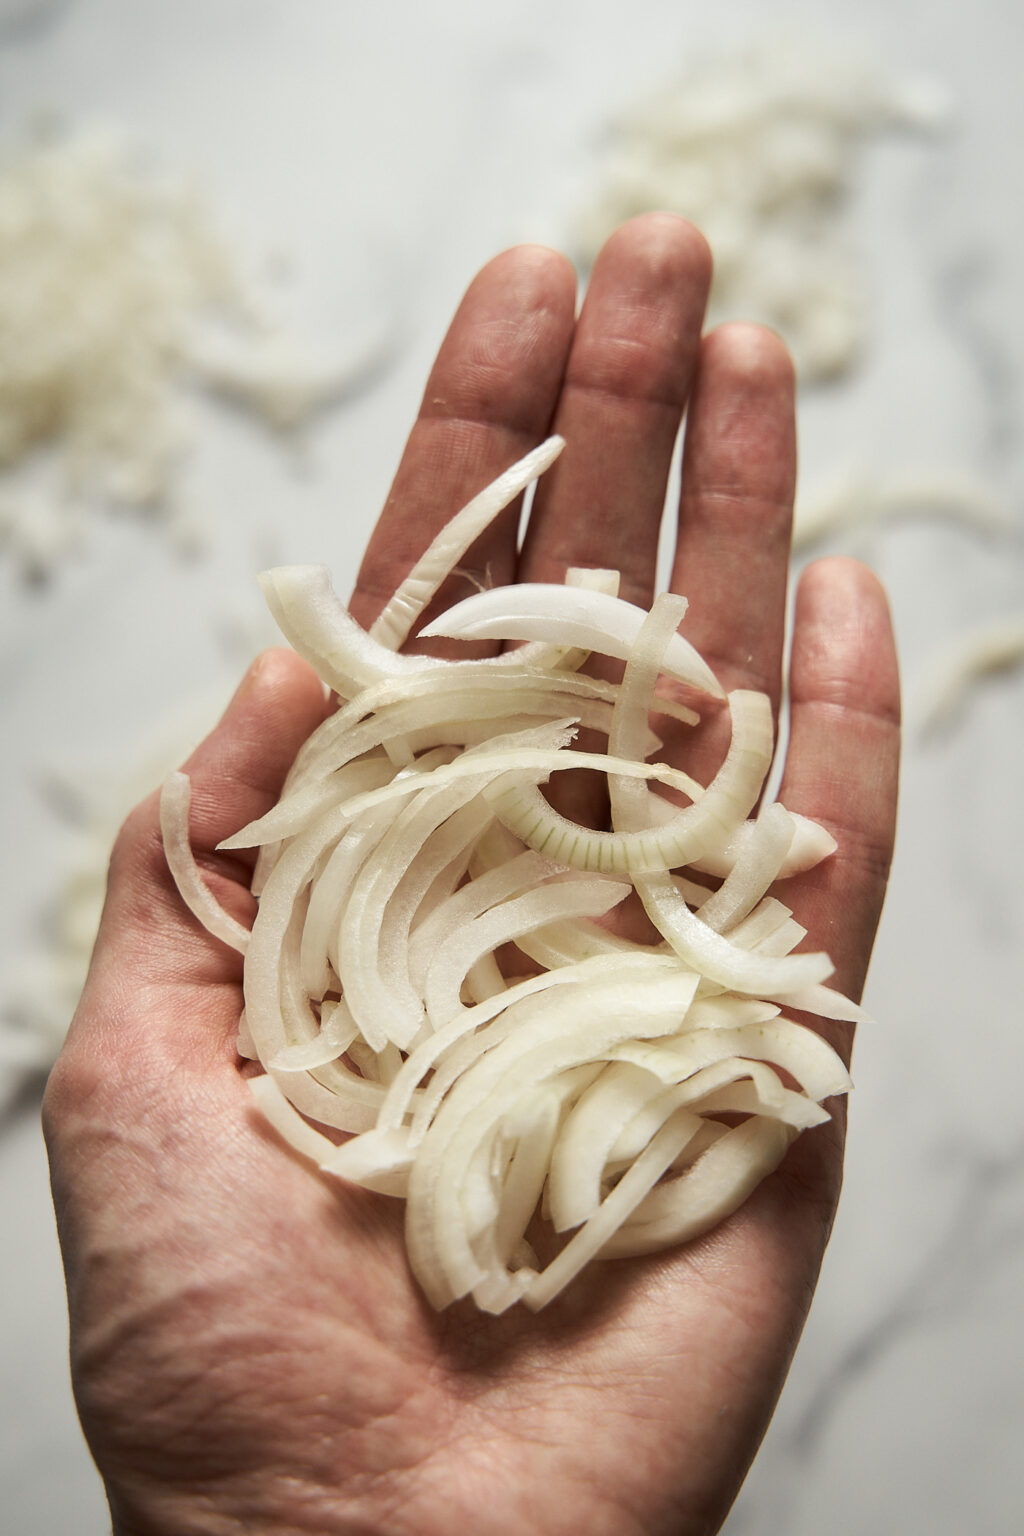 Half-rings or moon-sliced onions in the hand